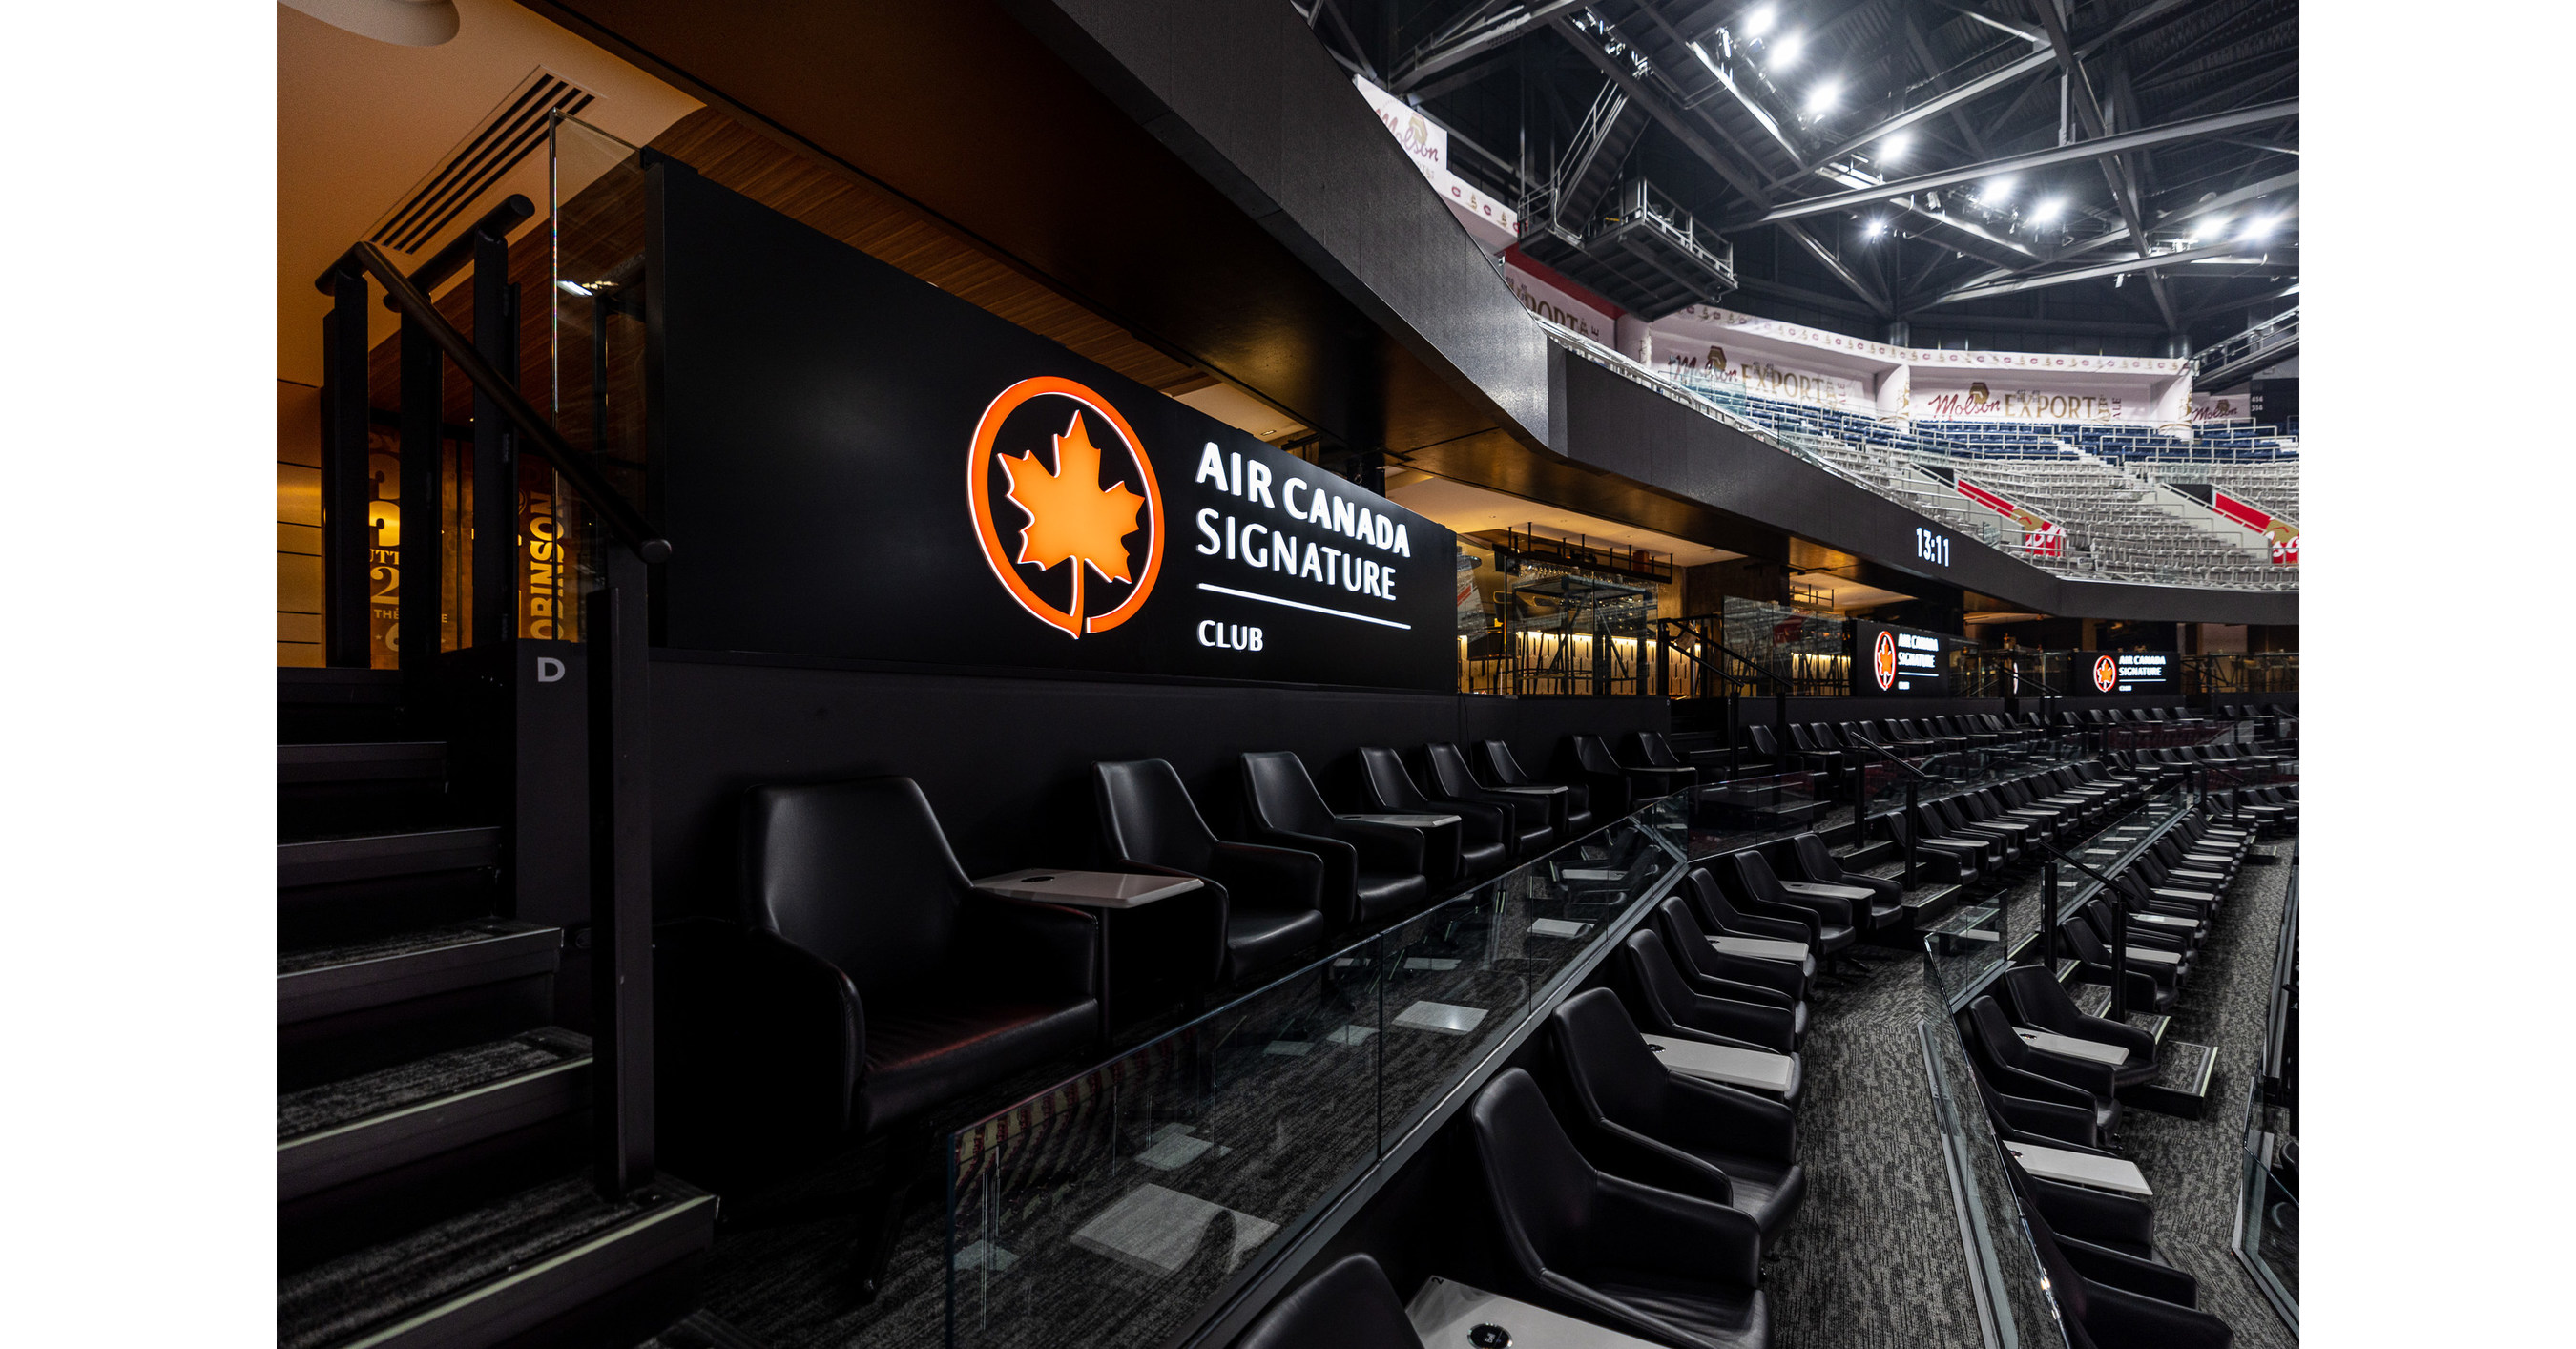 https://mma.prnewswire.com/media/1919003/Air_Canada_Air_Canada_and_the_Montreal_Canadiens_Inaugurate_New.jpg?p=facebook